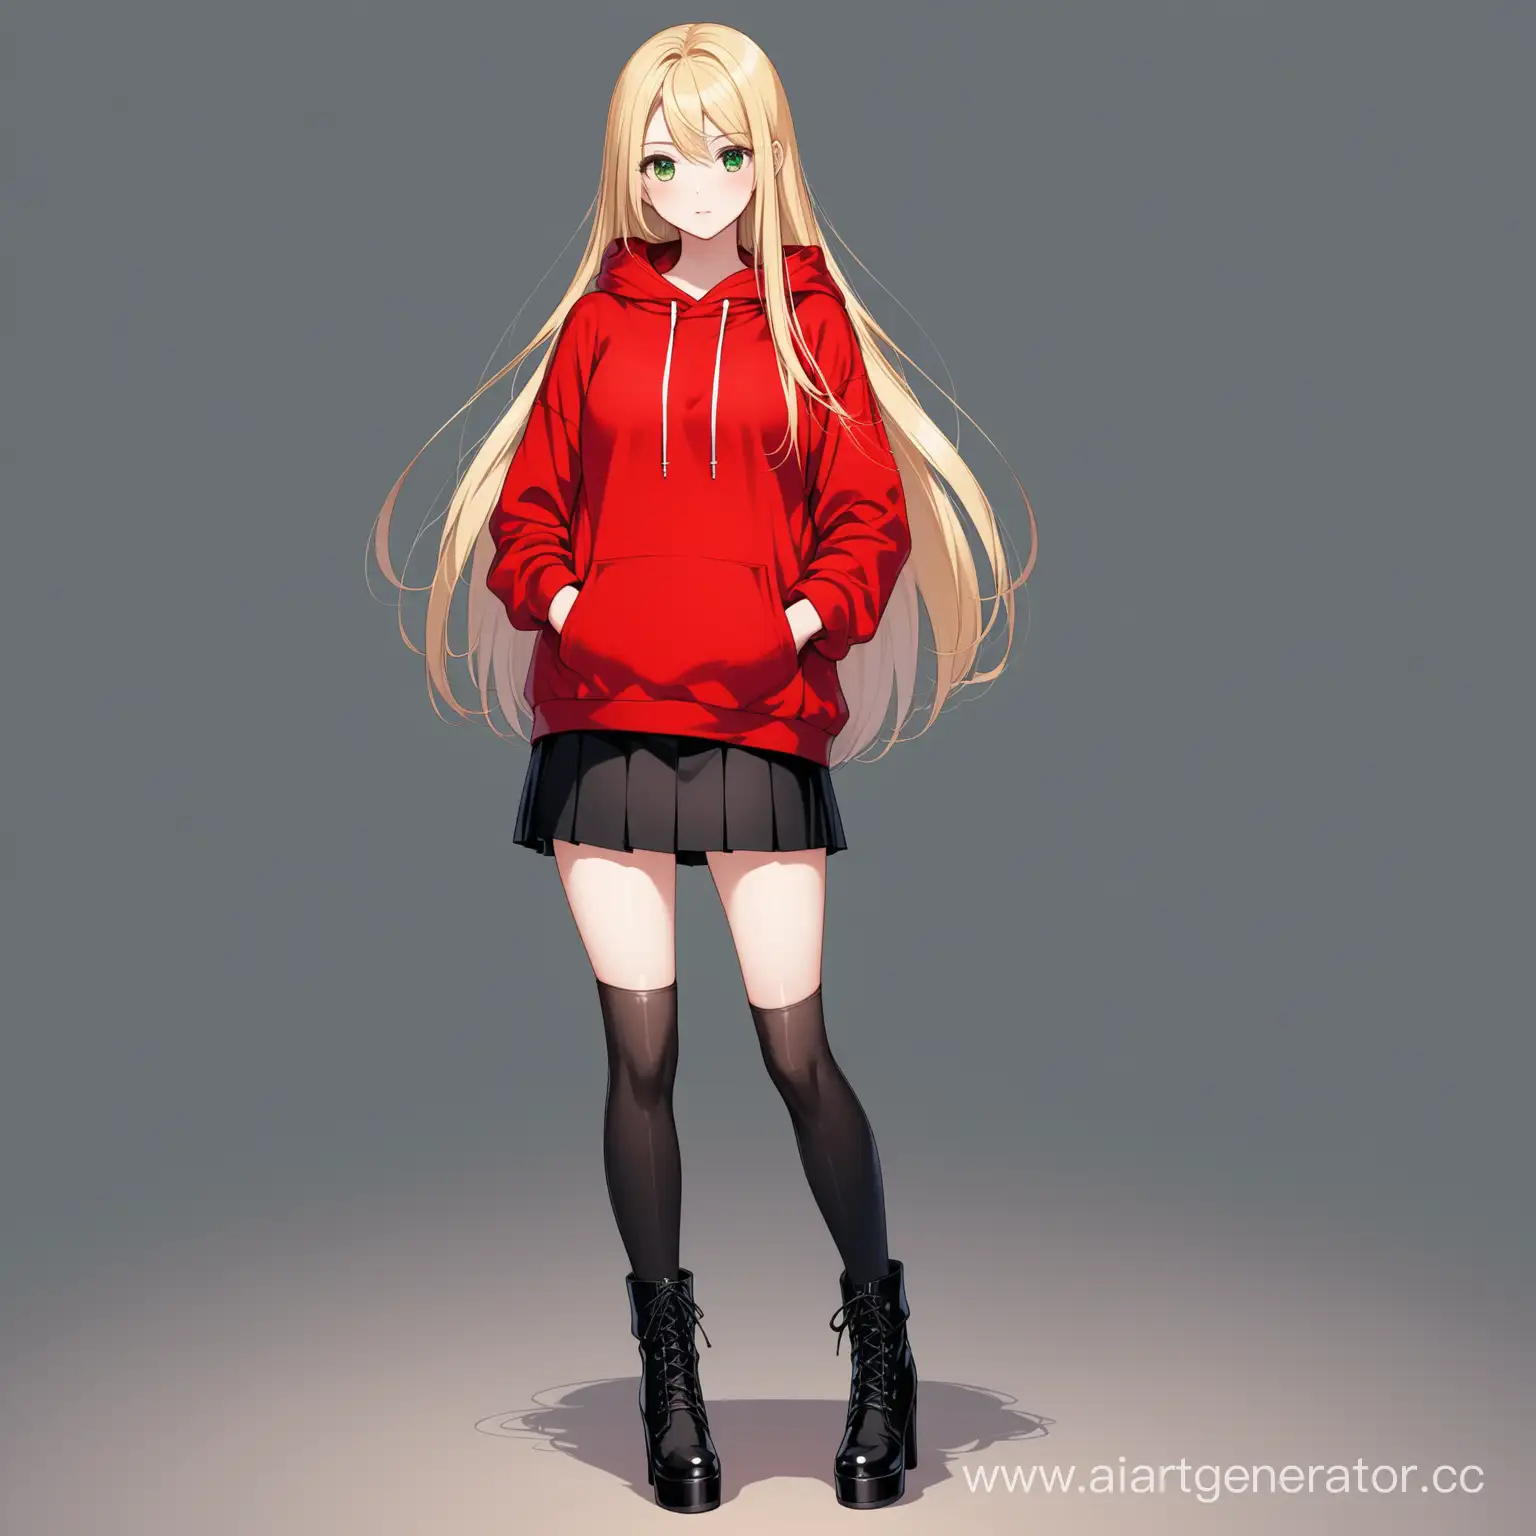 a beautiful girl, long blonde straight hair, green eyes, She is wearing a red hoodie and a black skirt and black heeled boots